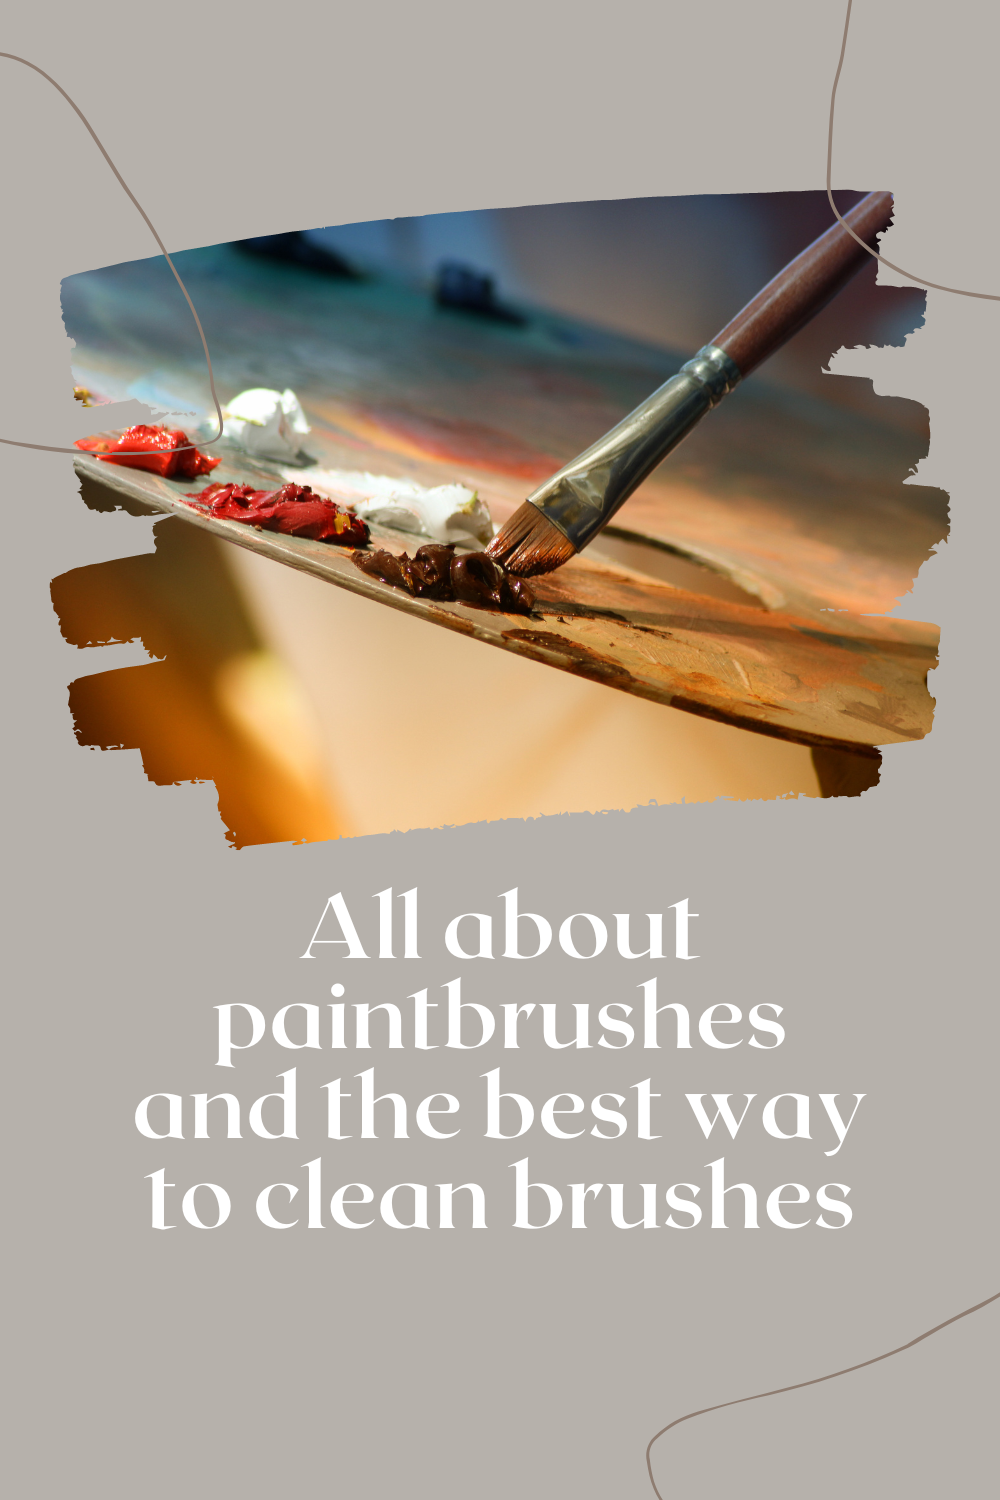 You are currently viewing All about paintbrushes and the best way to clean brushes